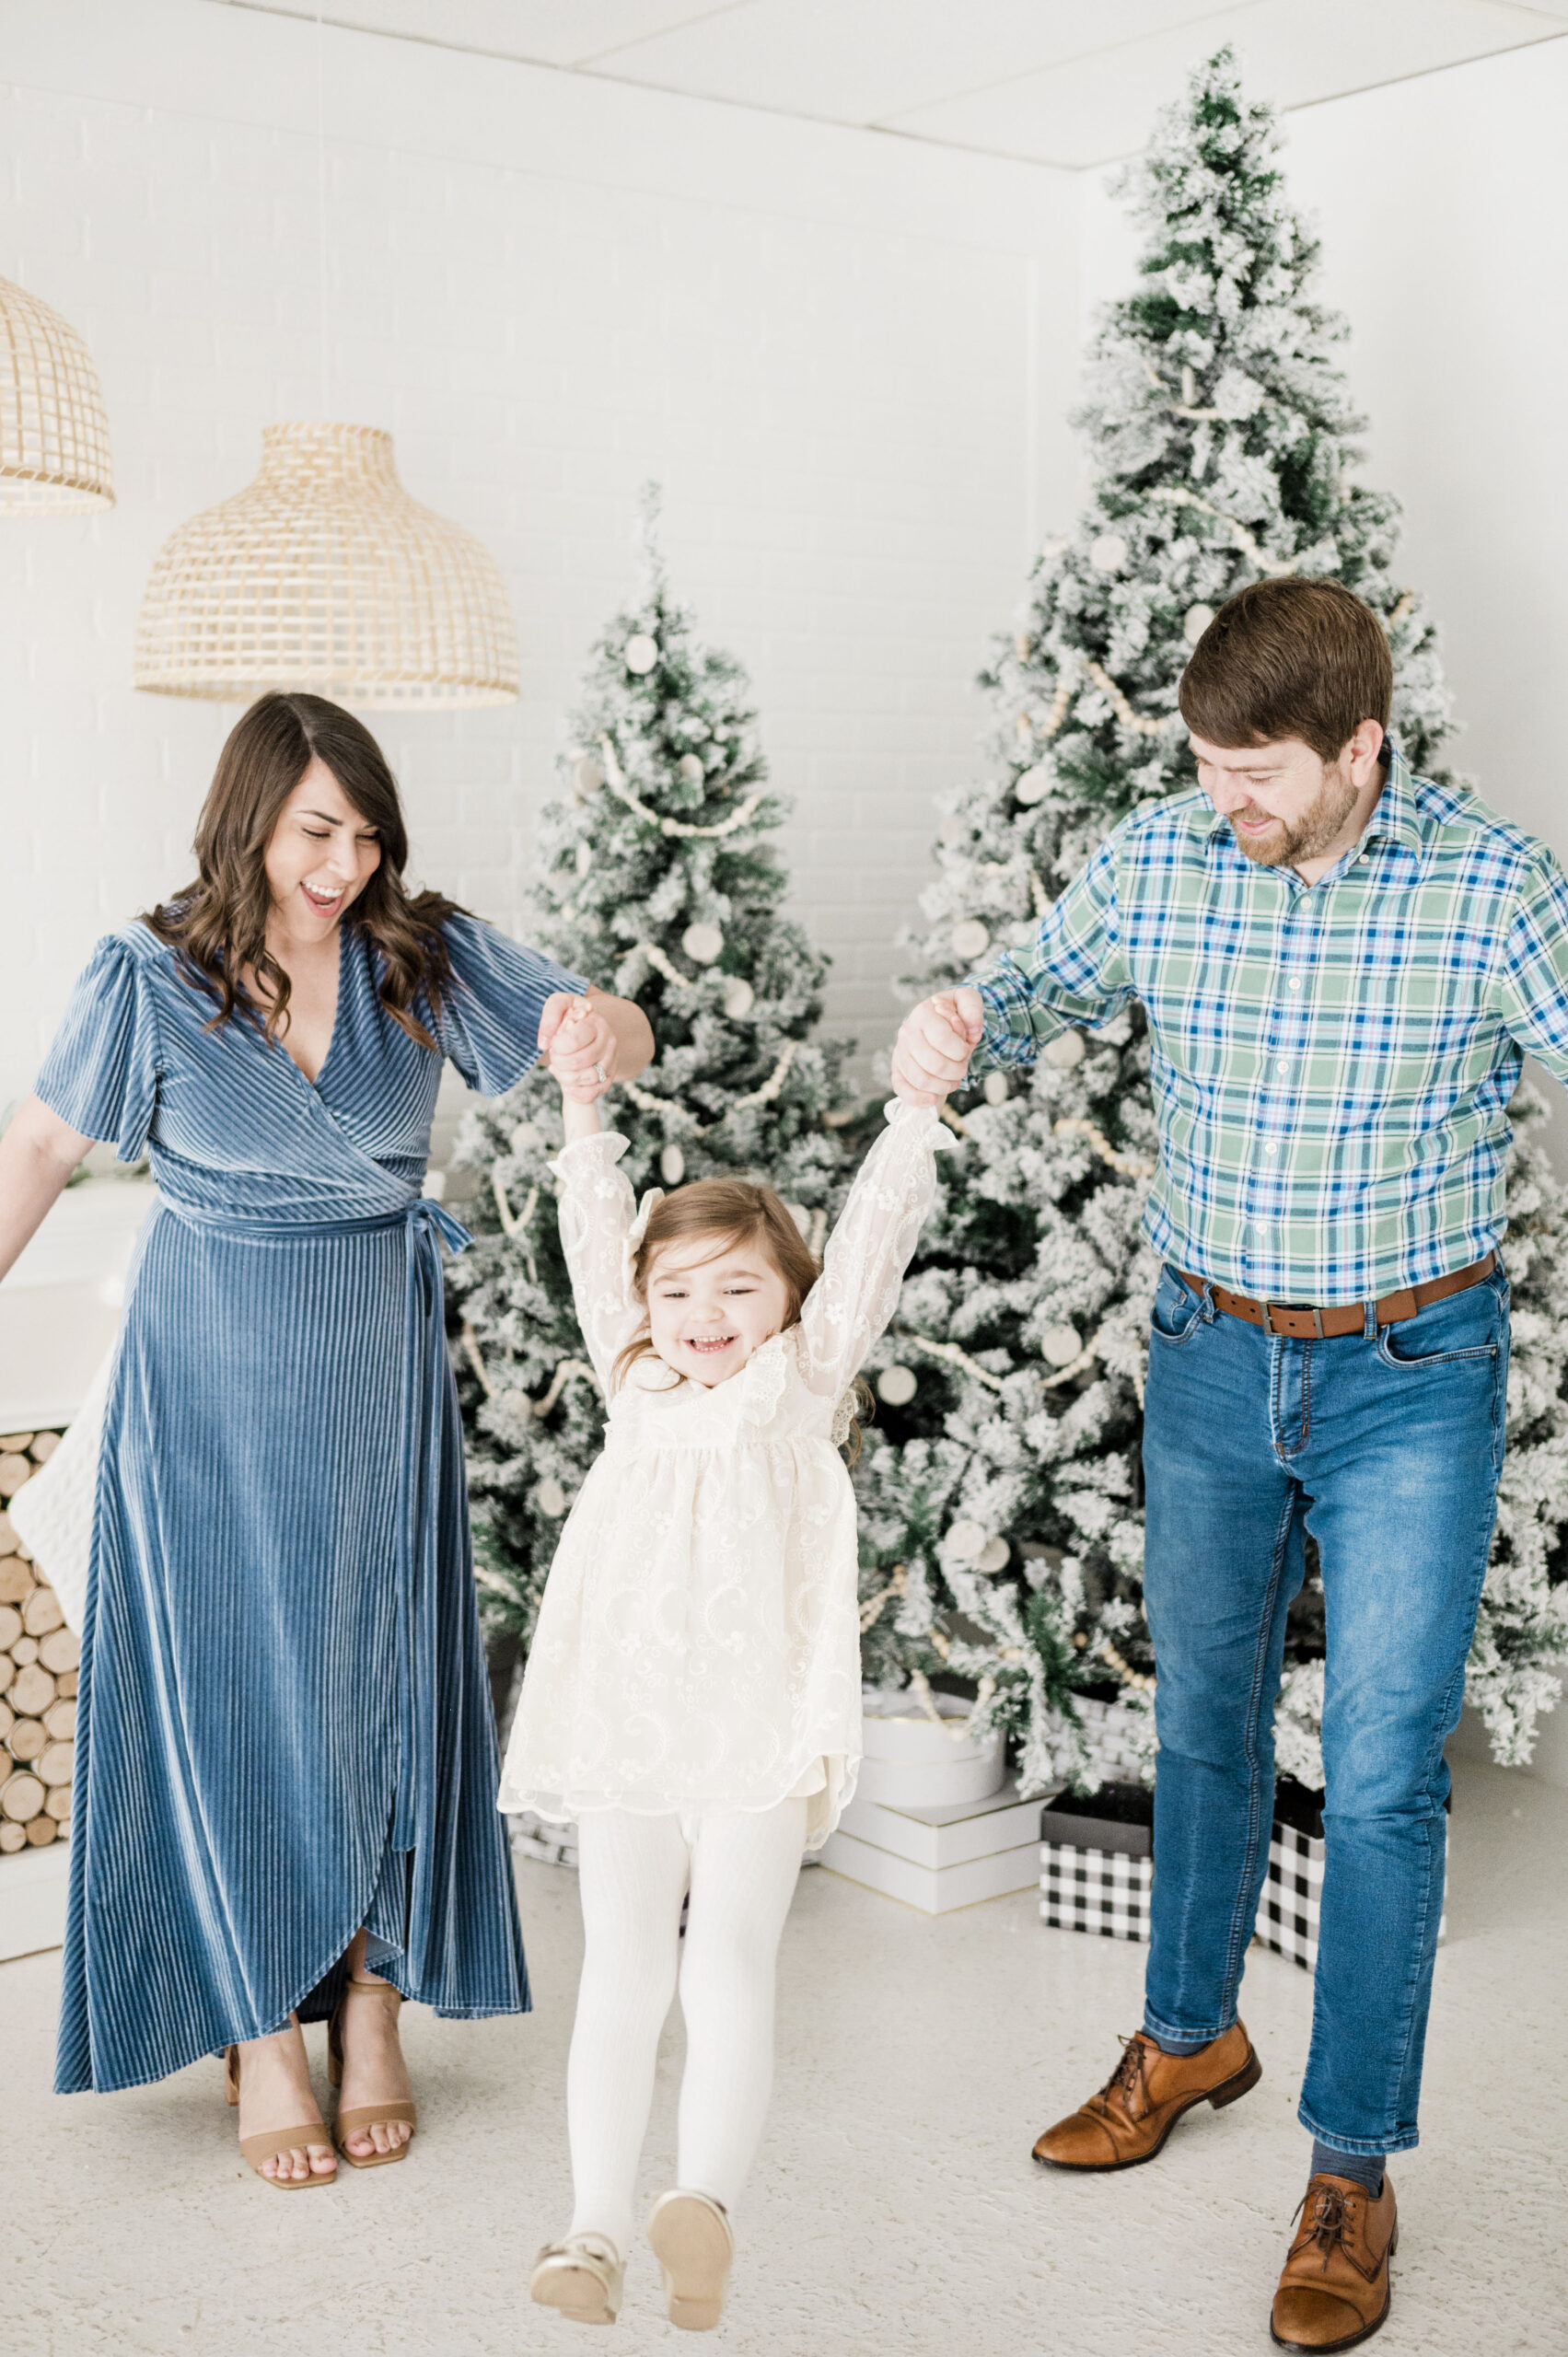 Brittney Naylor in maxi blue velvet dress, holding daughters hand, and husband John holding other hand of daughter wearing jeans and shirt, in front of fireplace and christmas tree